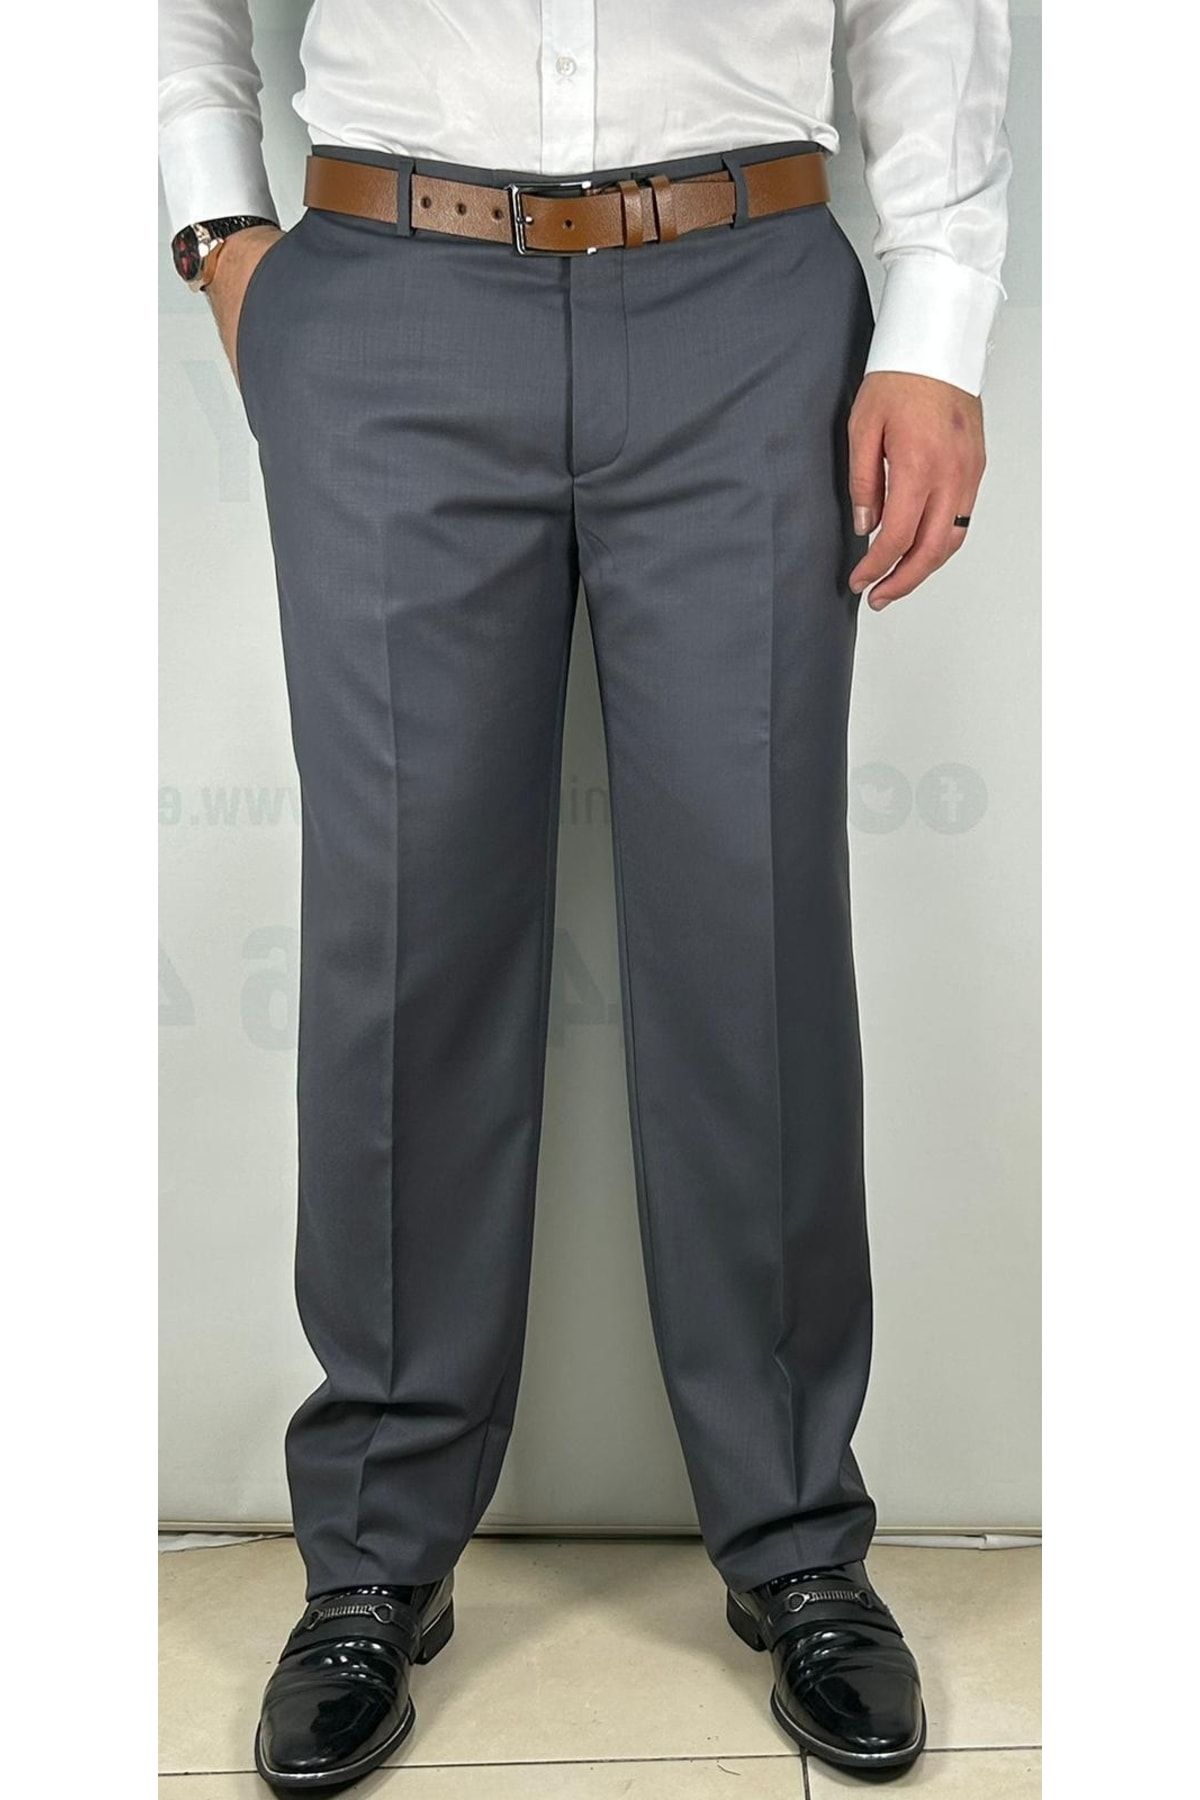 Cantabil Men's Fawn Formal Trousers